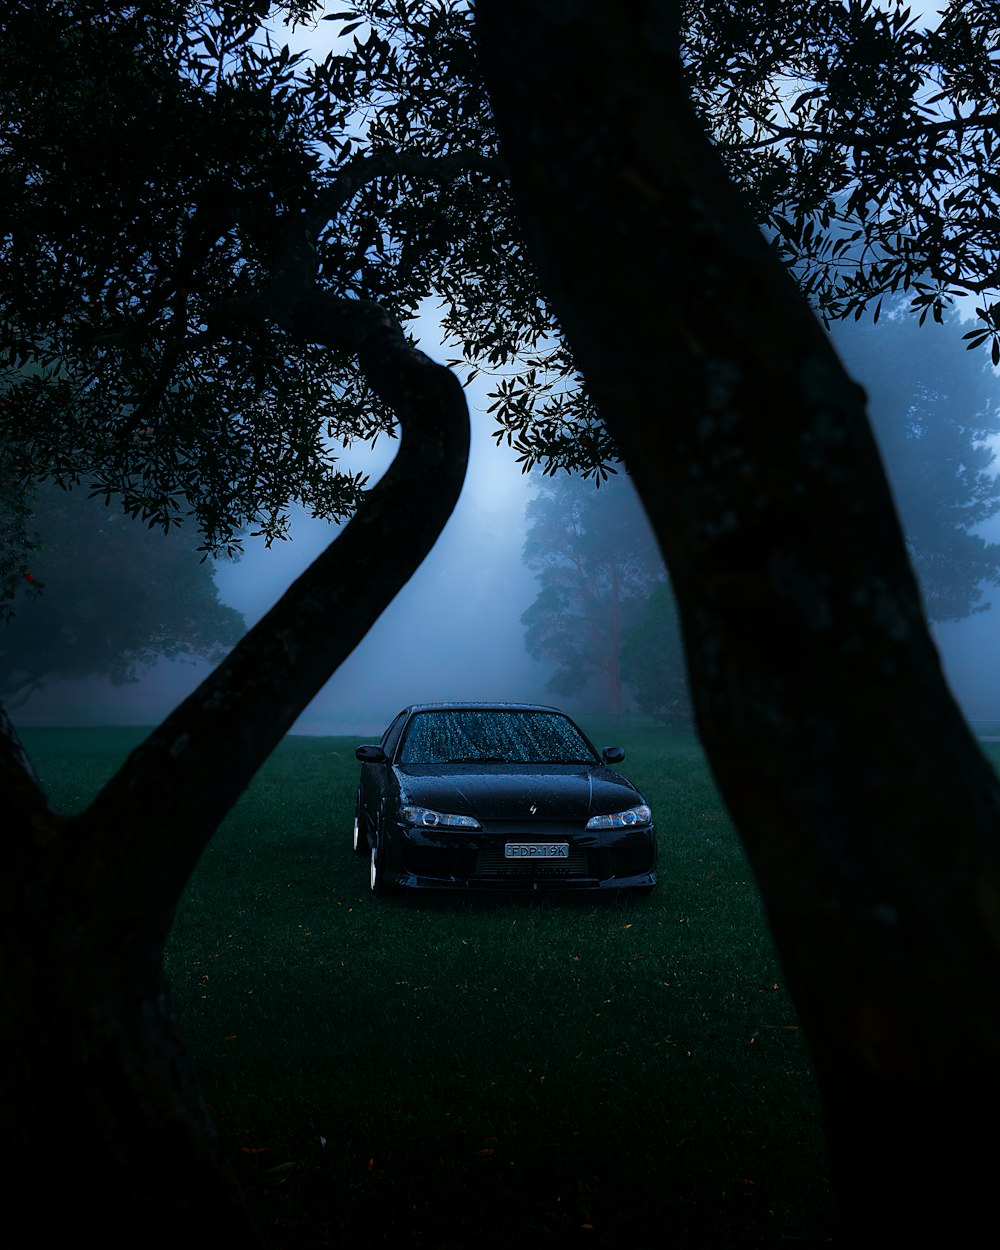 a car parked in the grass under a tree